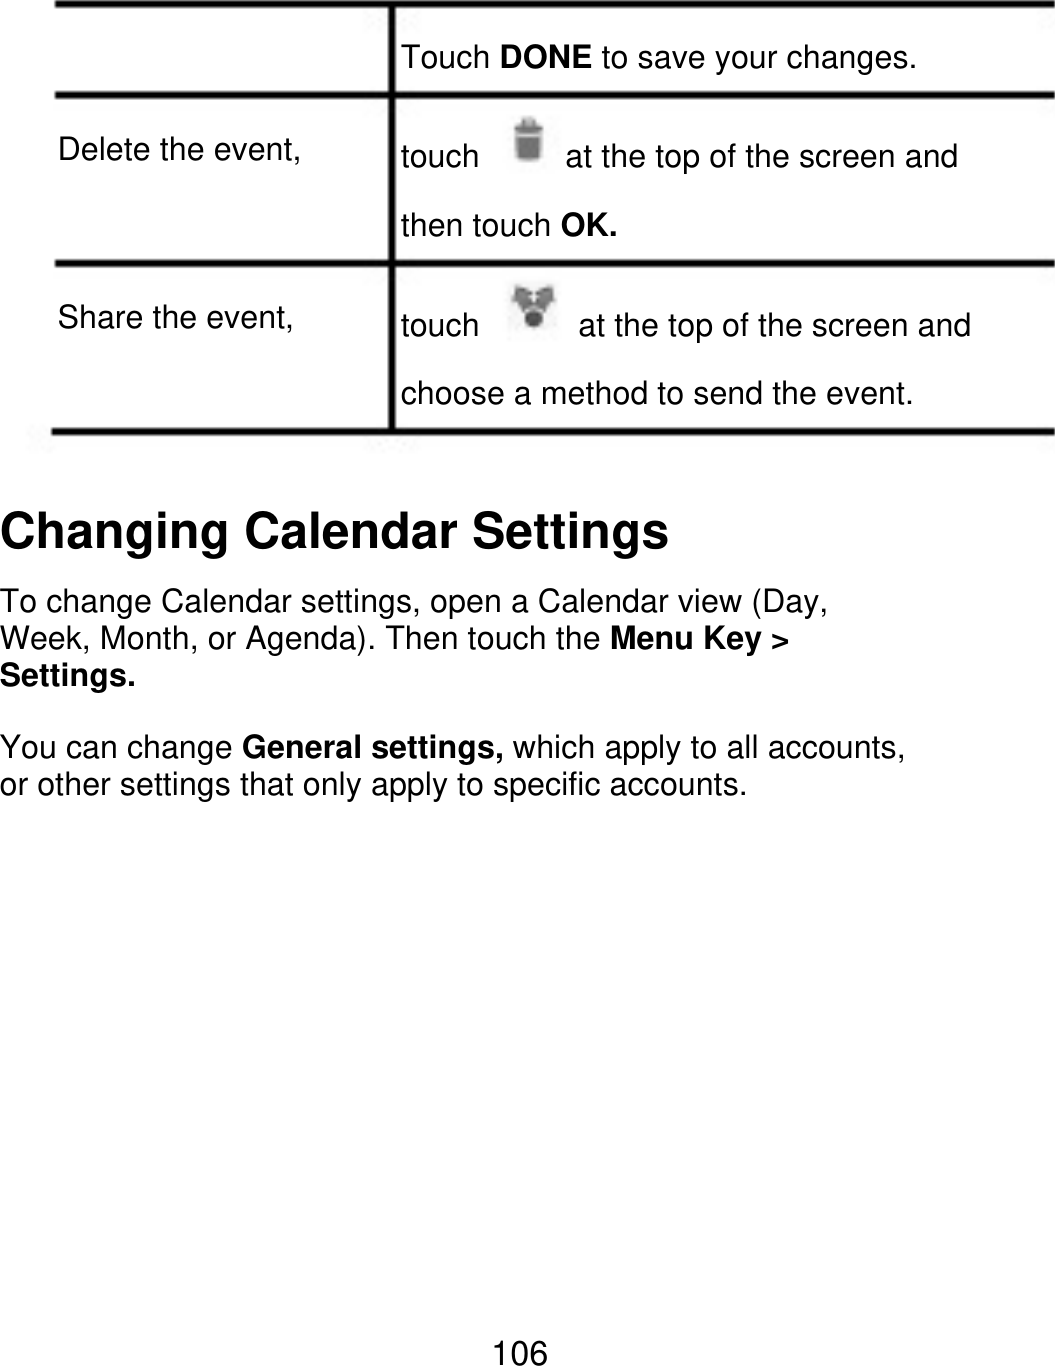 Touch DONE to save your changes. Delete the event, touch at the top of the screen and then touch OK. Share the event, touch at the top of the screen and choose a method to send the event. Changing Calendar Settings To change Calendar settings, open a Calendar view (Day, Week, Month, or Agenda). Then touch the Menu Key &gt; Settings. You can change General settings, which apply to all accounts, or other settings that only apply to specific accounts. 106 